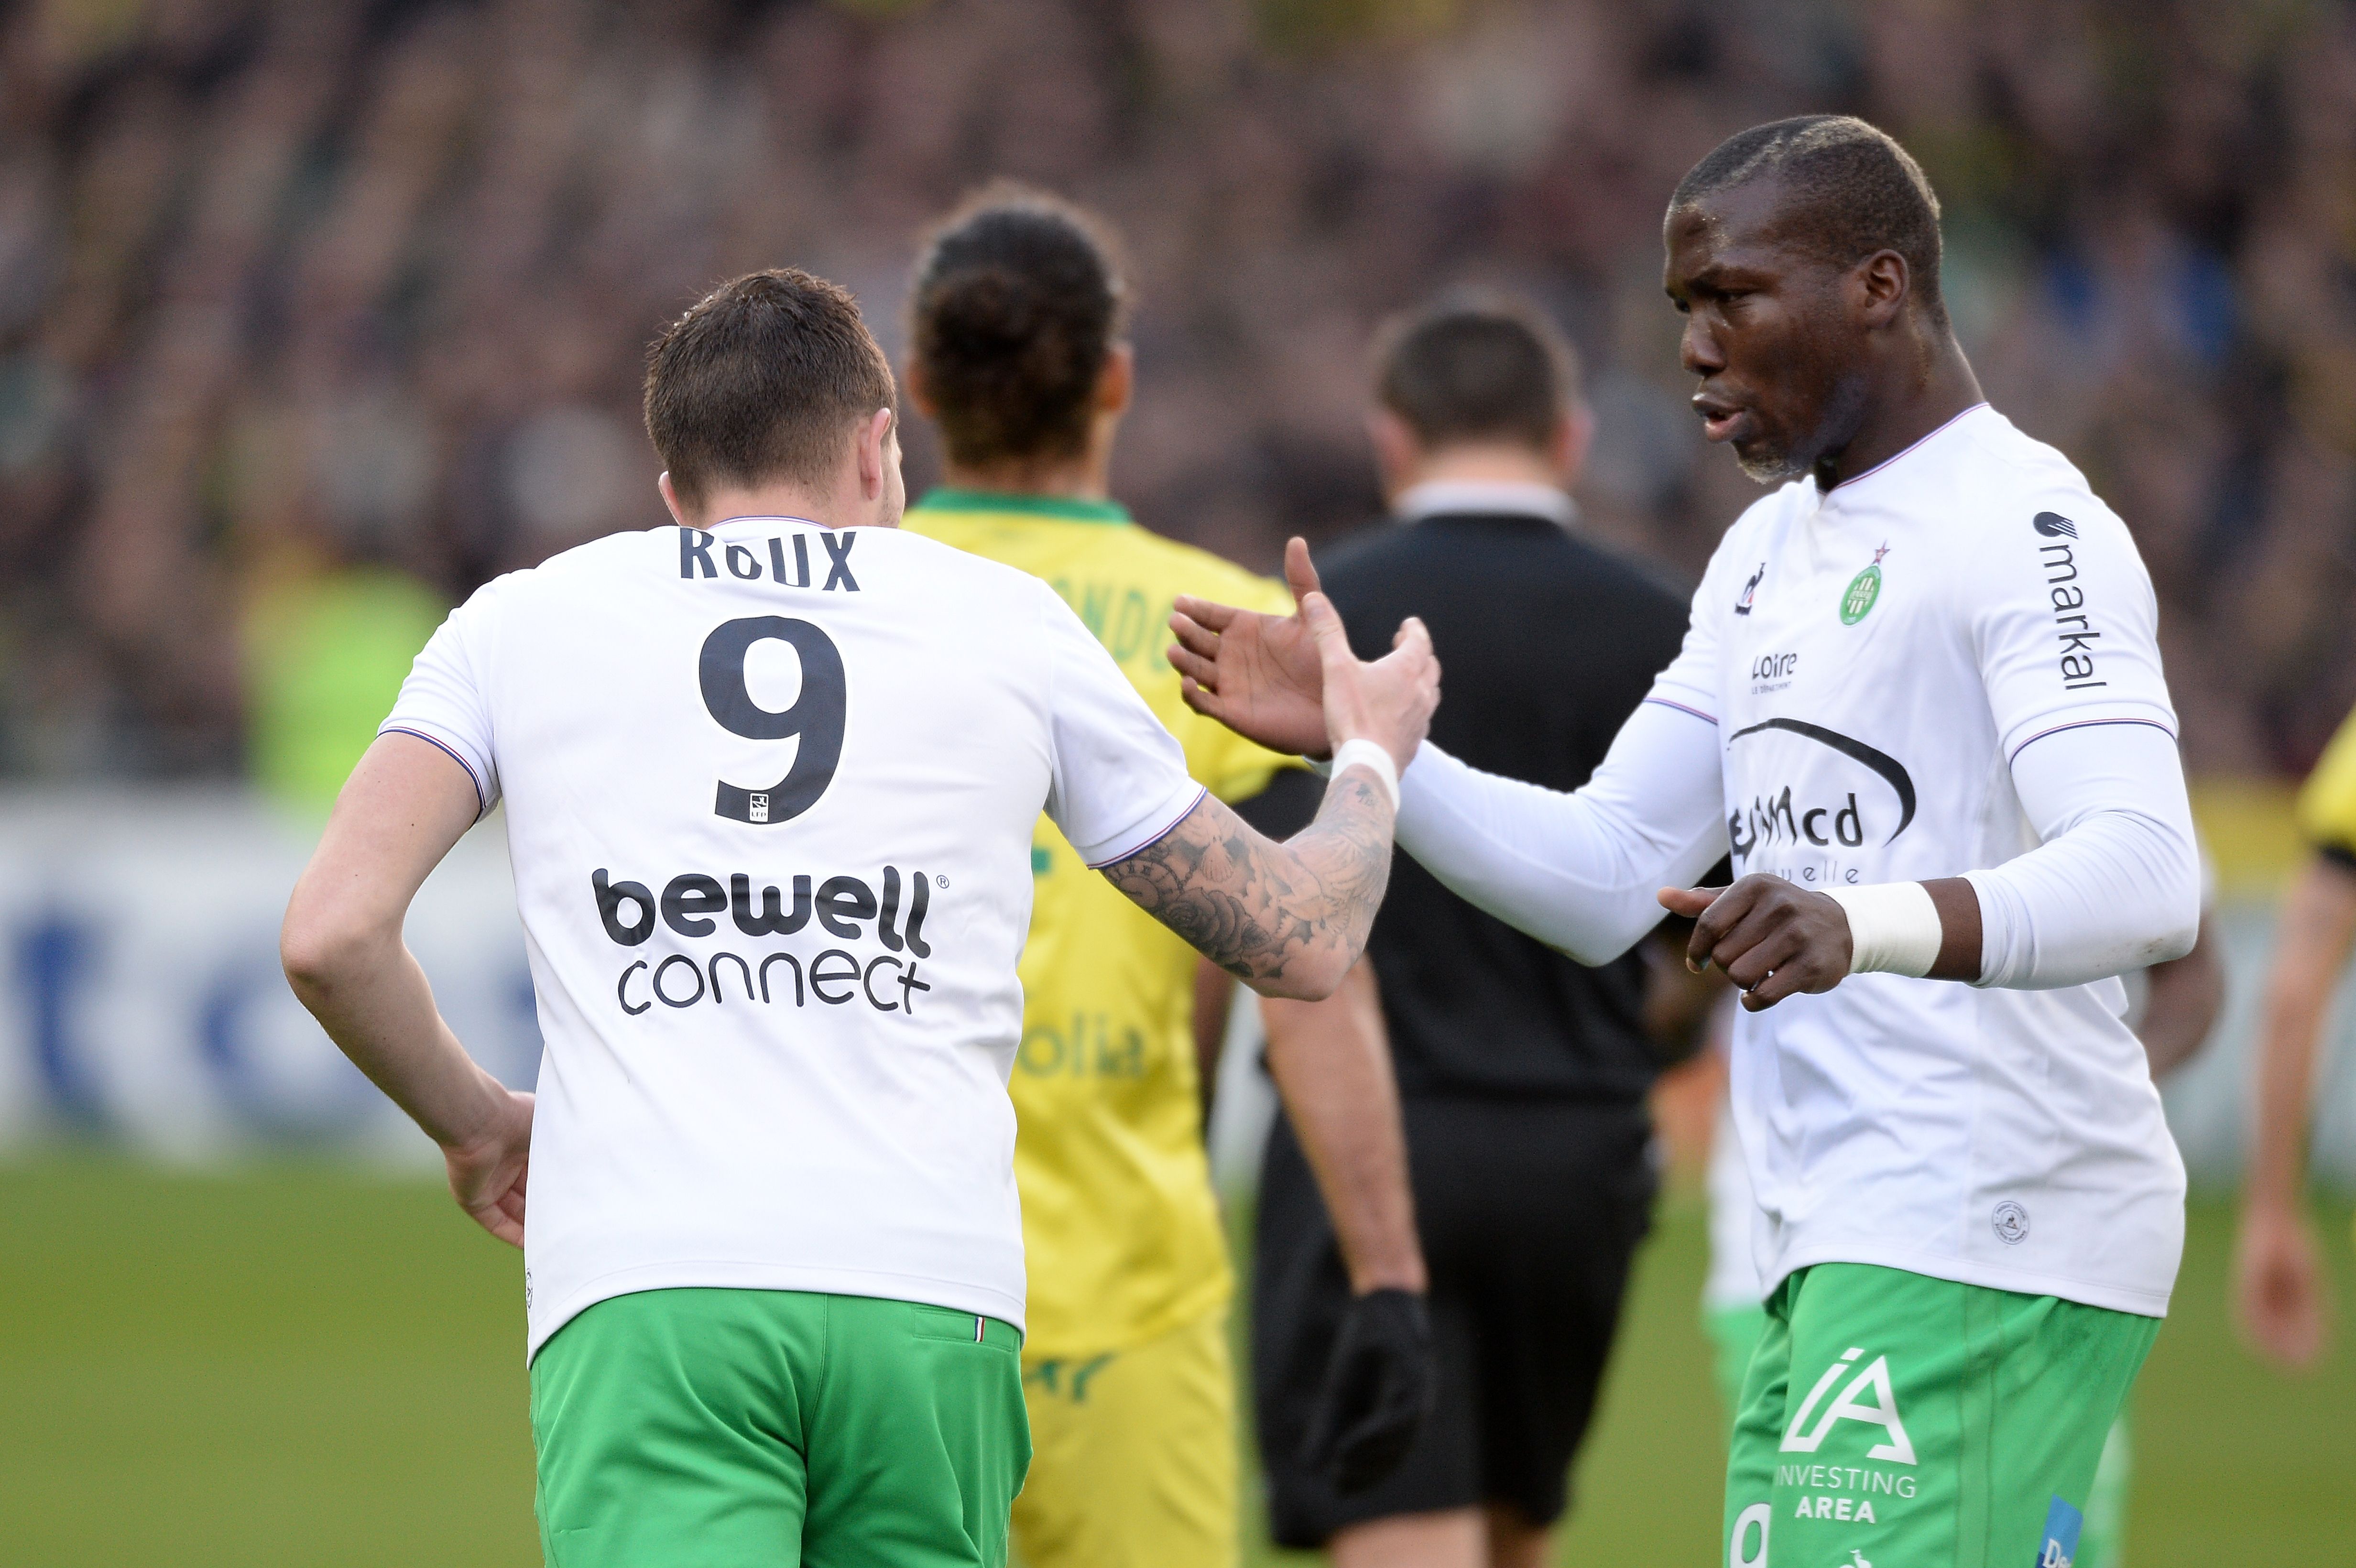 Saint-Etienne's French forward Nolan Roux (L) is congratulated by his teammate Saint-Etienne's Guinean defender Florentin Pogba after he scored a penalty during the French L1 football match between Nantes and Saint-Etienne on January 10, 2015 at the Beaujoire stadium in Nantes, western France. AFP PHOTO/ JEAN-SEBASTIEN EVRARD / AFP / JEAN-SEBASTIEN EVRARD        (Photo credit should read JEAN-SEBASTIEN EVRARD/AFP/Getty Images)